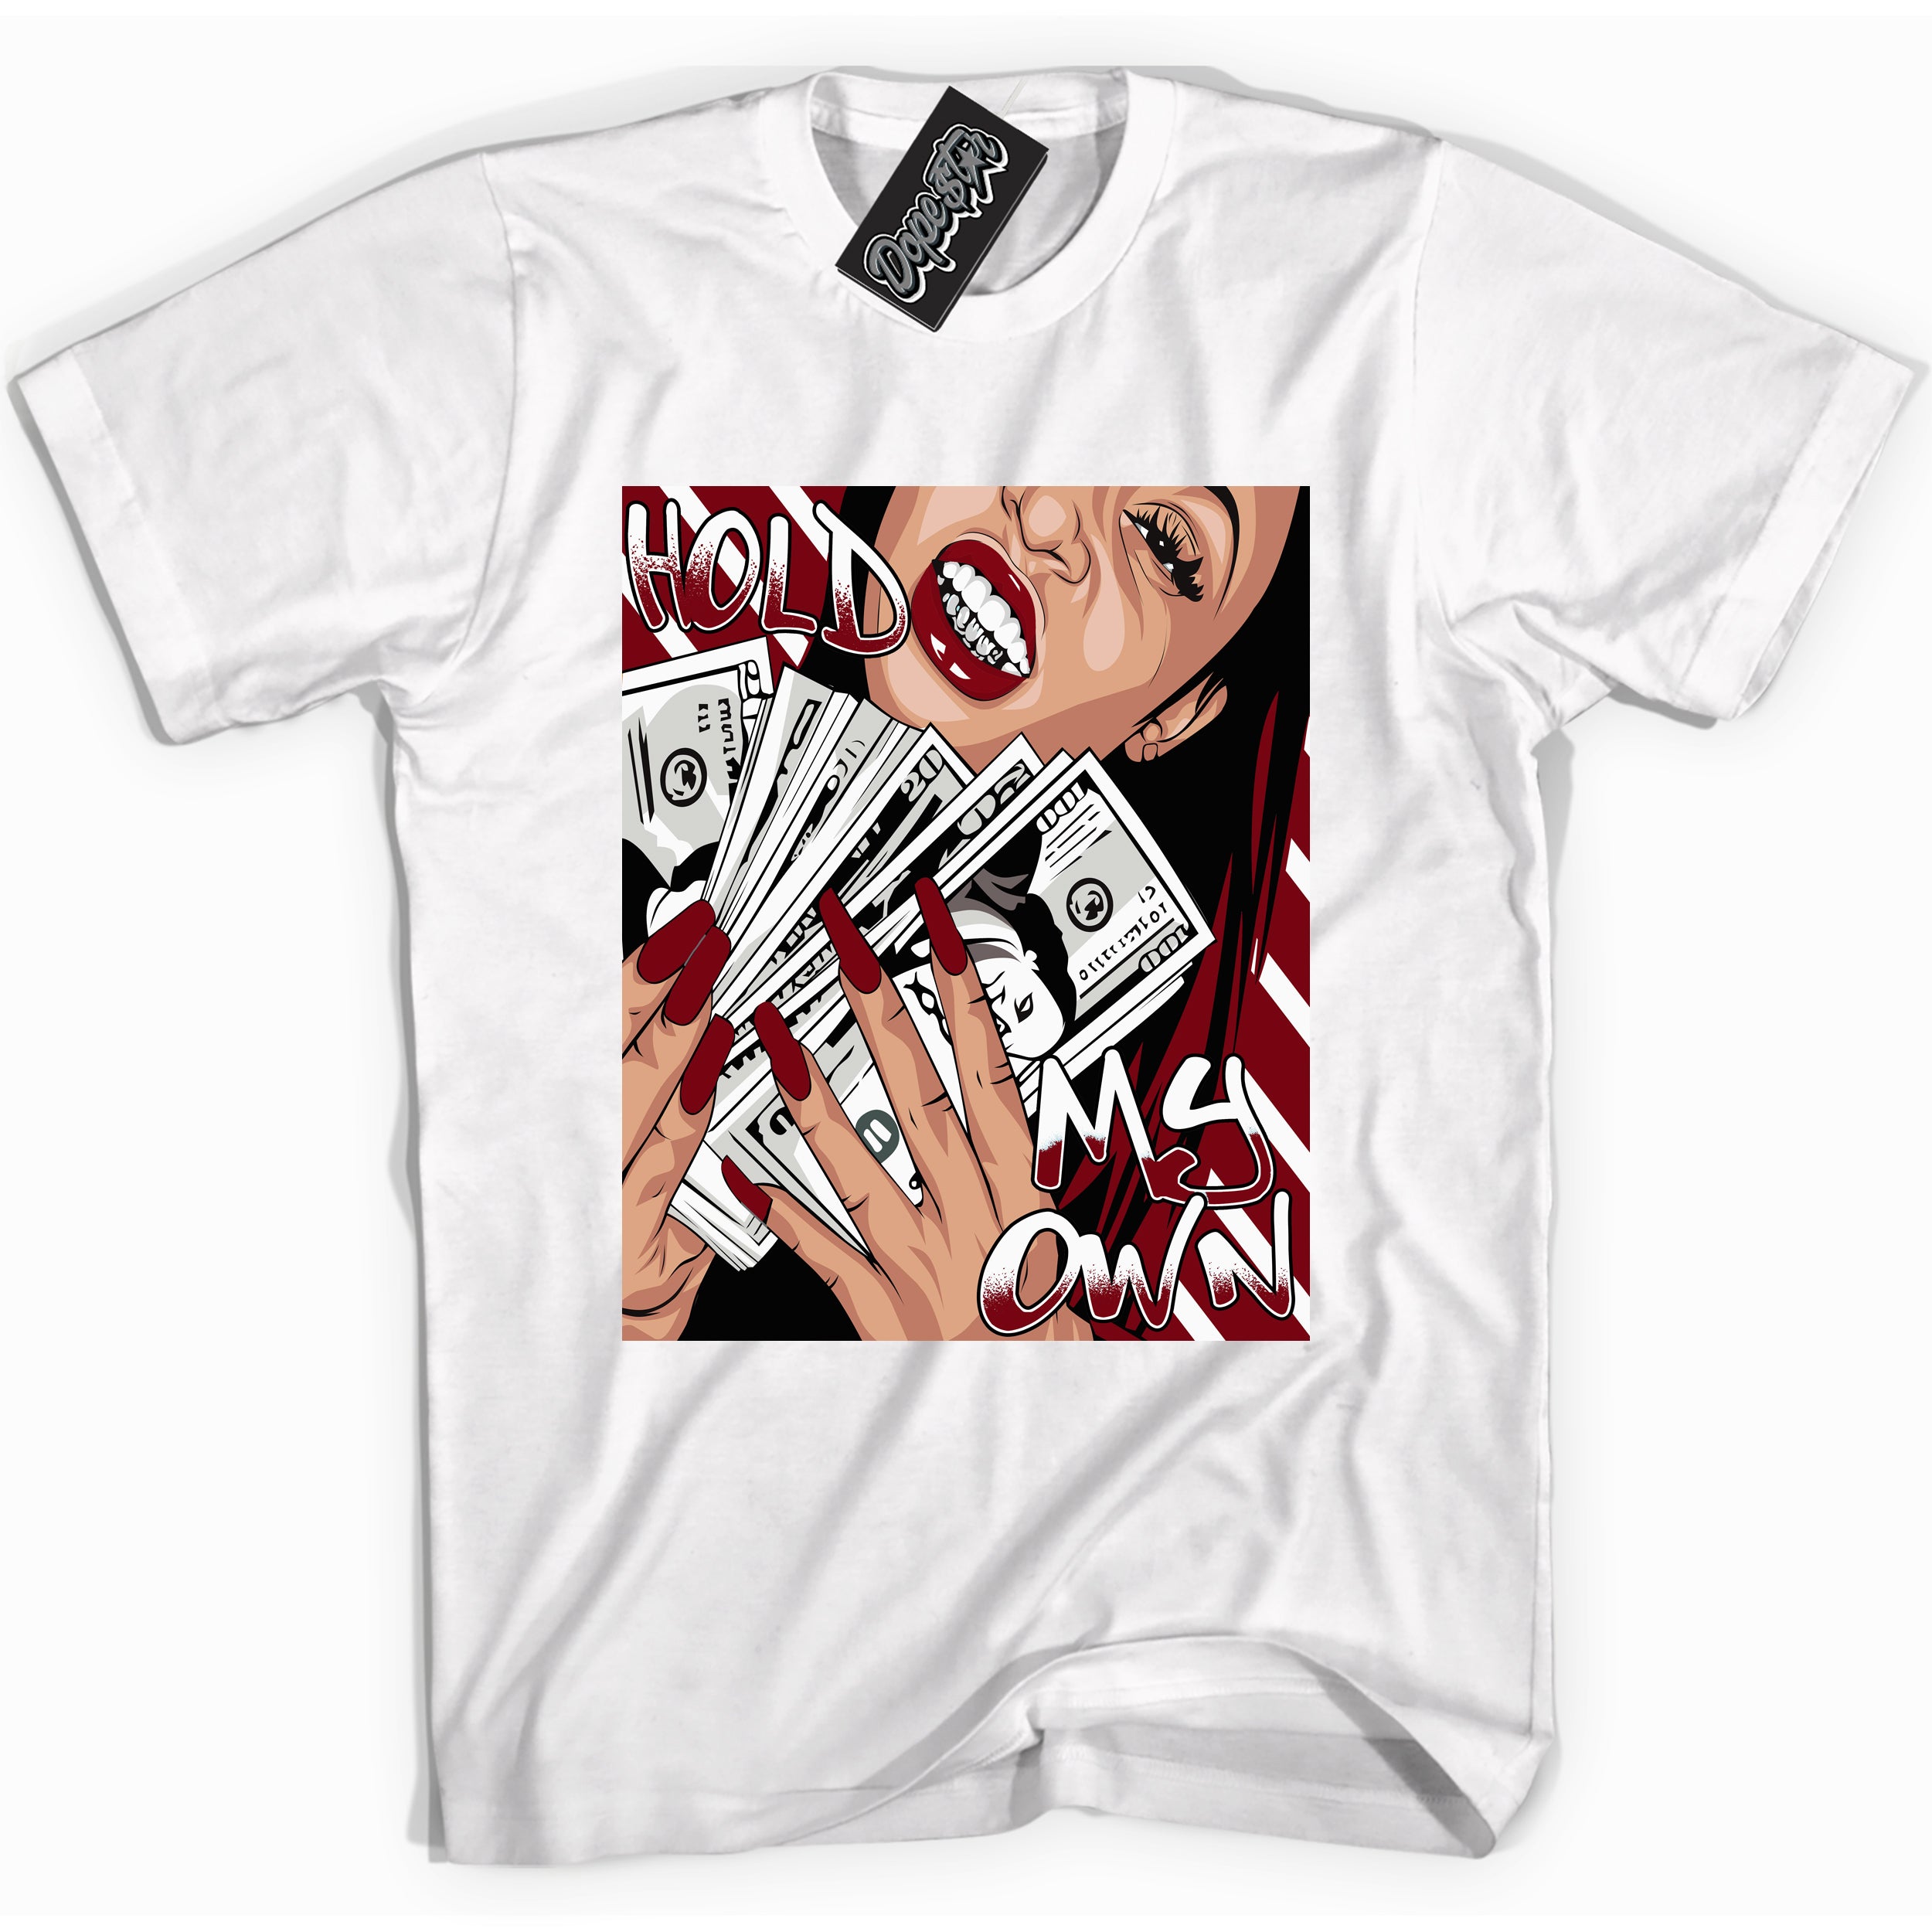 Cool White graphic tee with “ Hold My Own ” print, that perfectly matches OG Metallic Burgundy 1s sneakers 